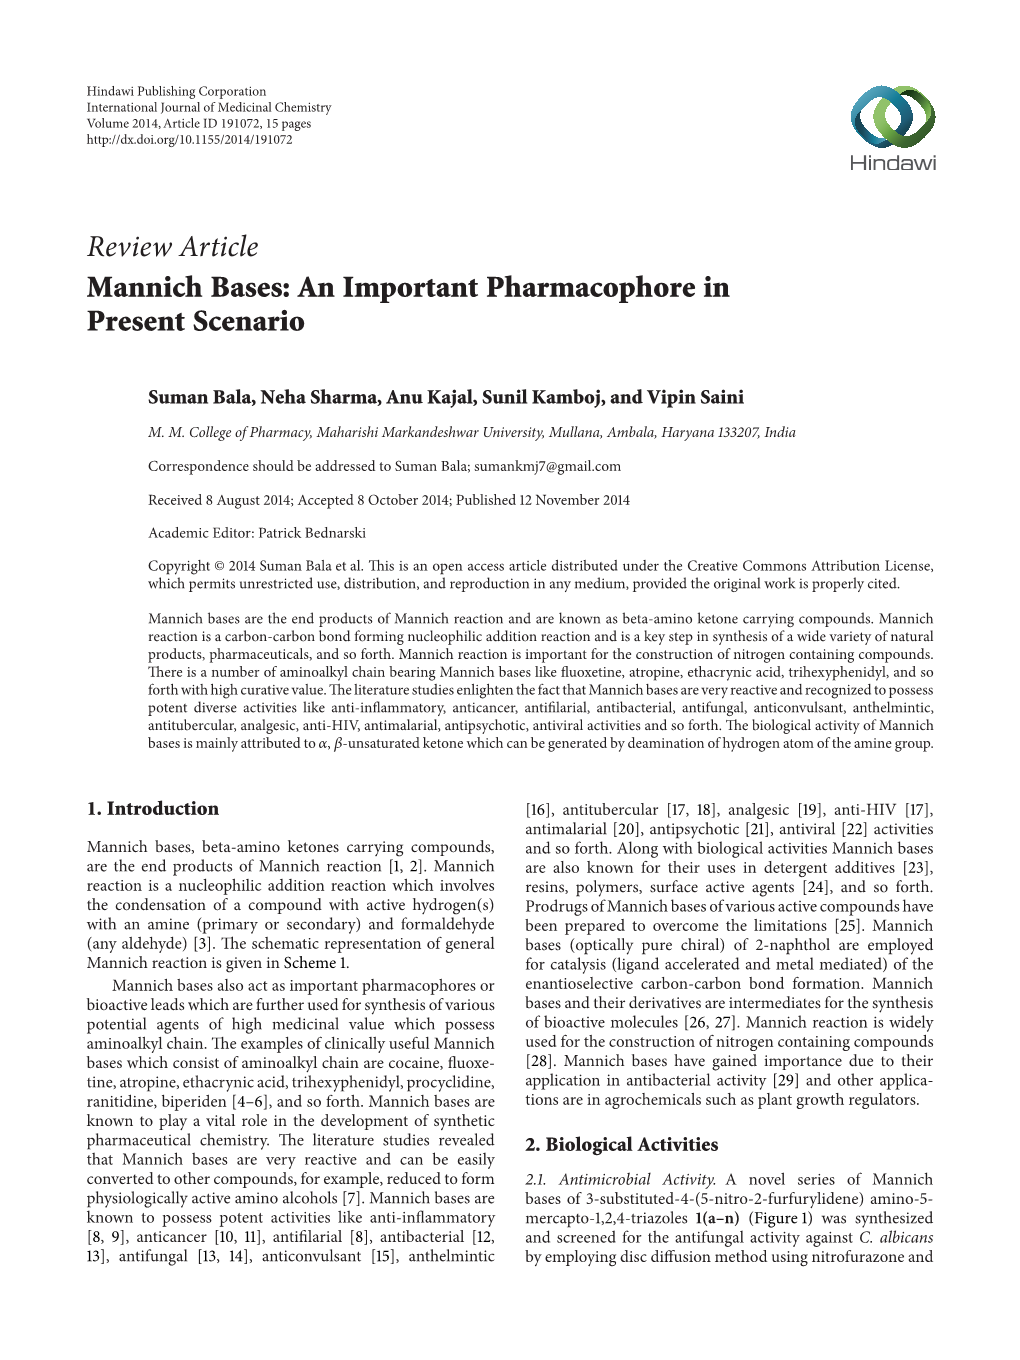 Review Article Mannich Bases: an Important Pharmacophore in Present Scenario